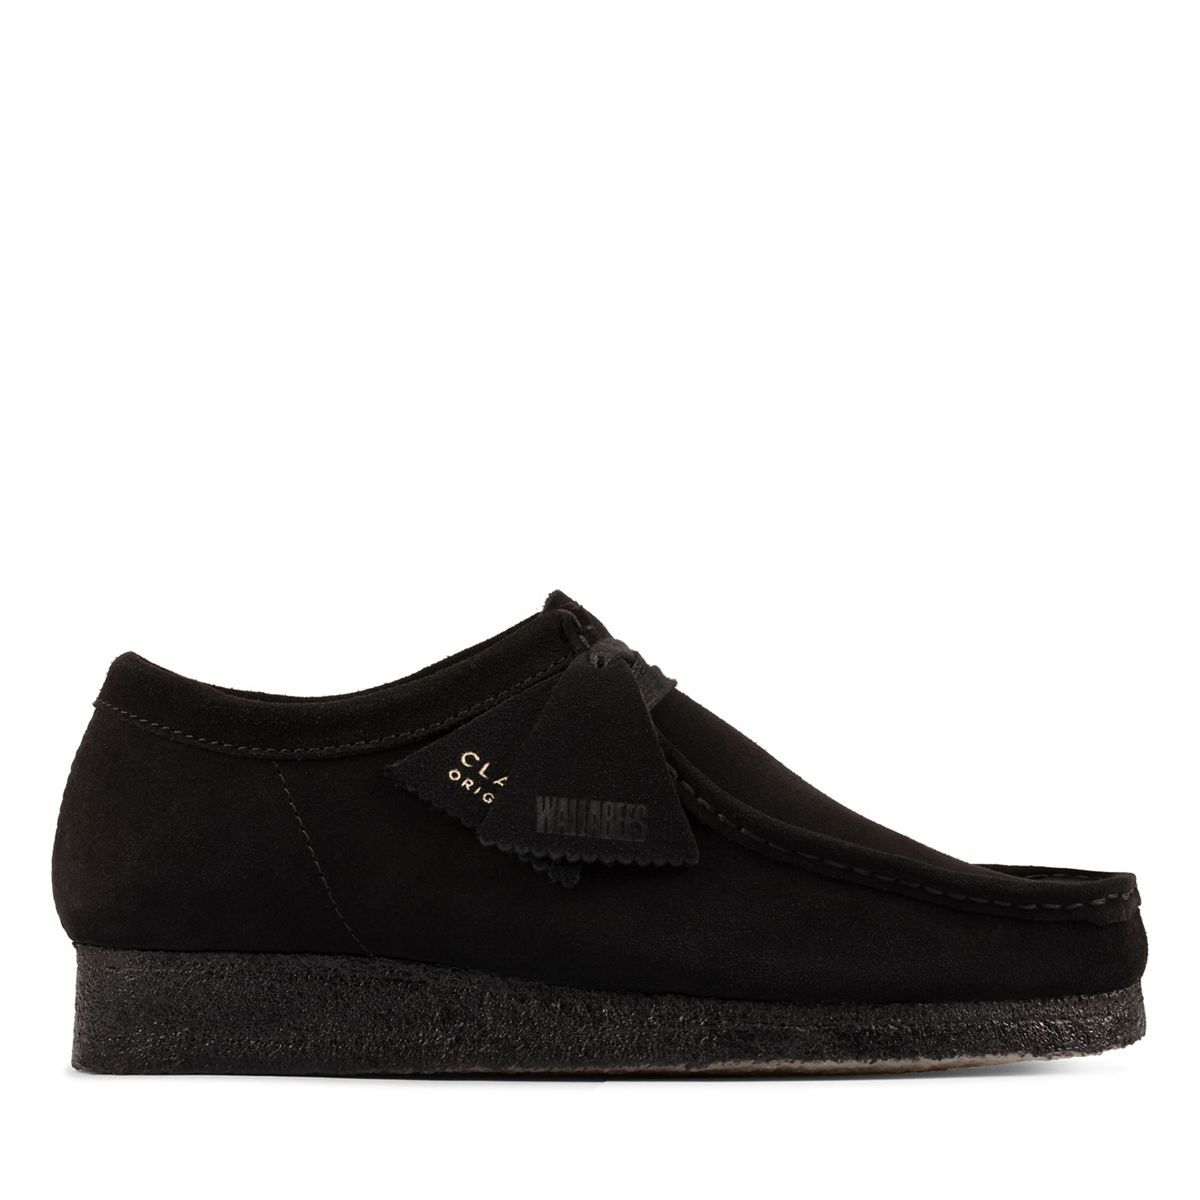 klo forpligtelse surfing Wallabee Black Suede - Clarks Canada Official Site | Clarks Shoes